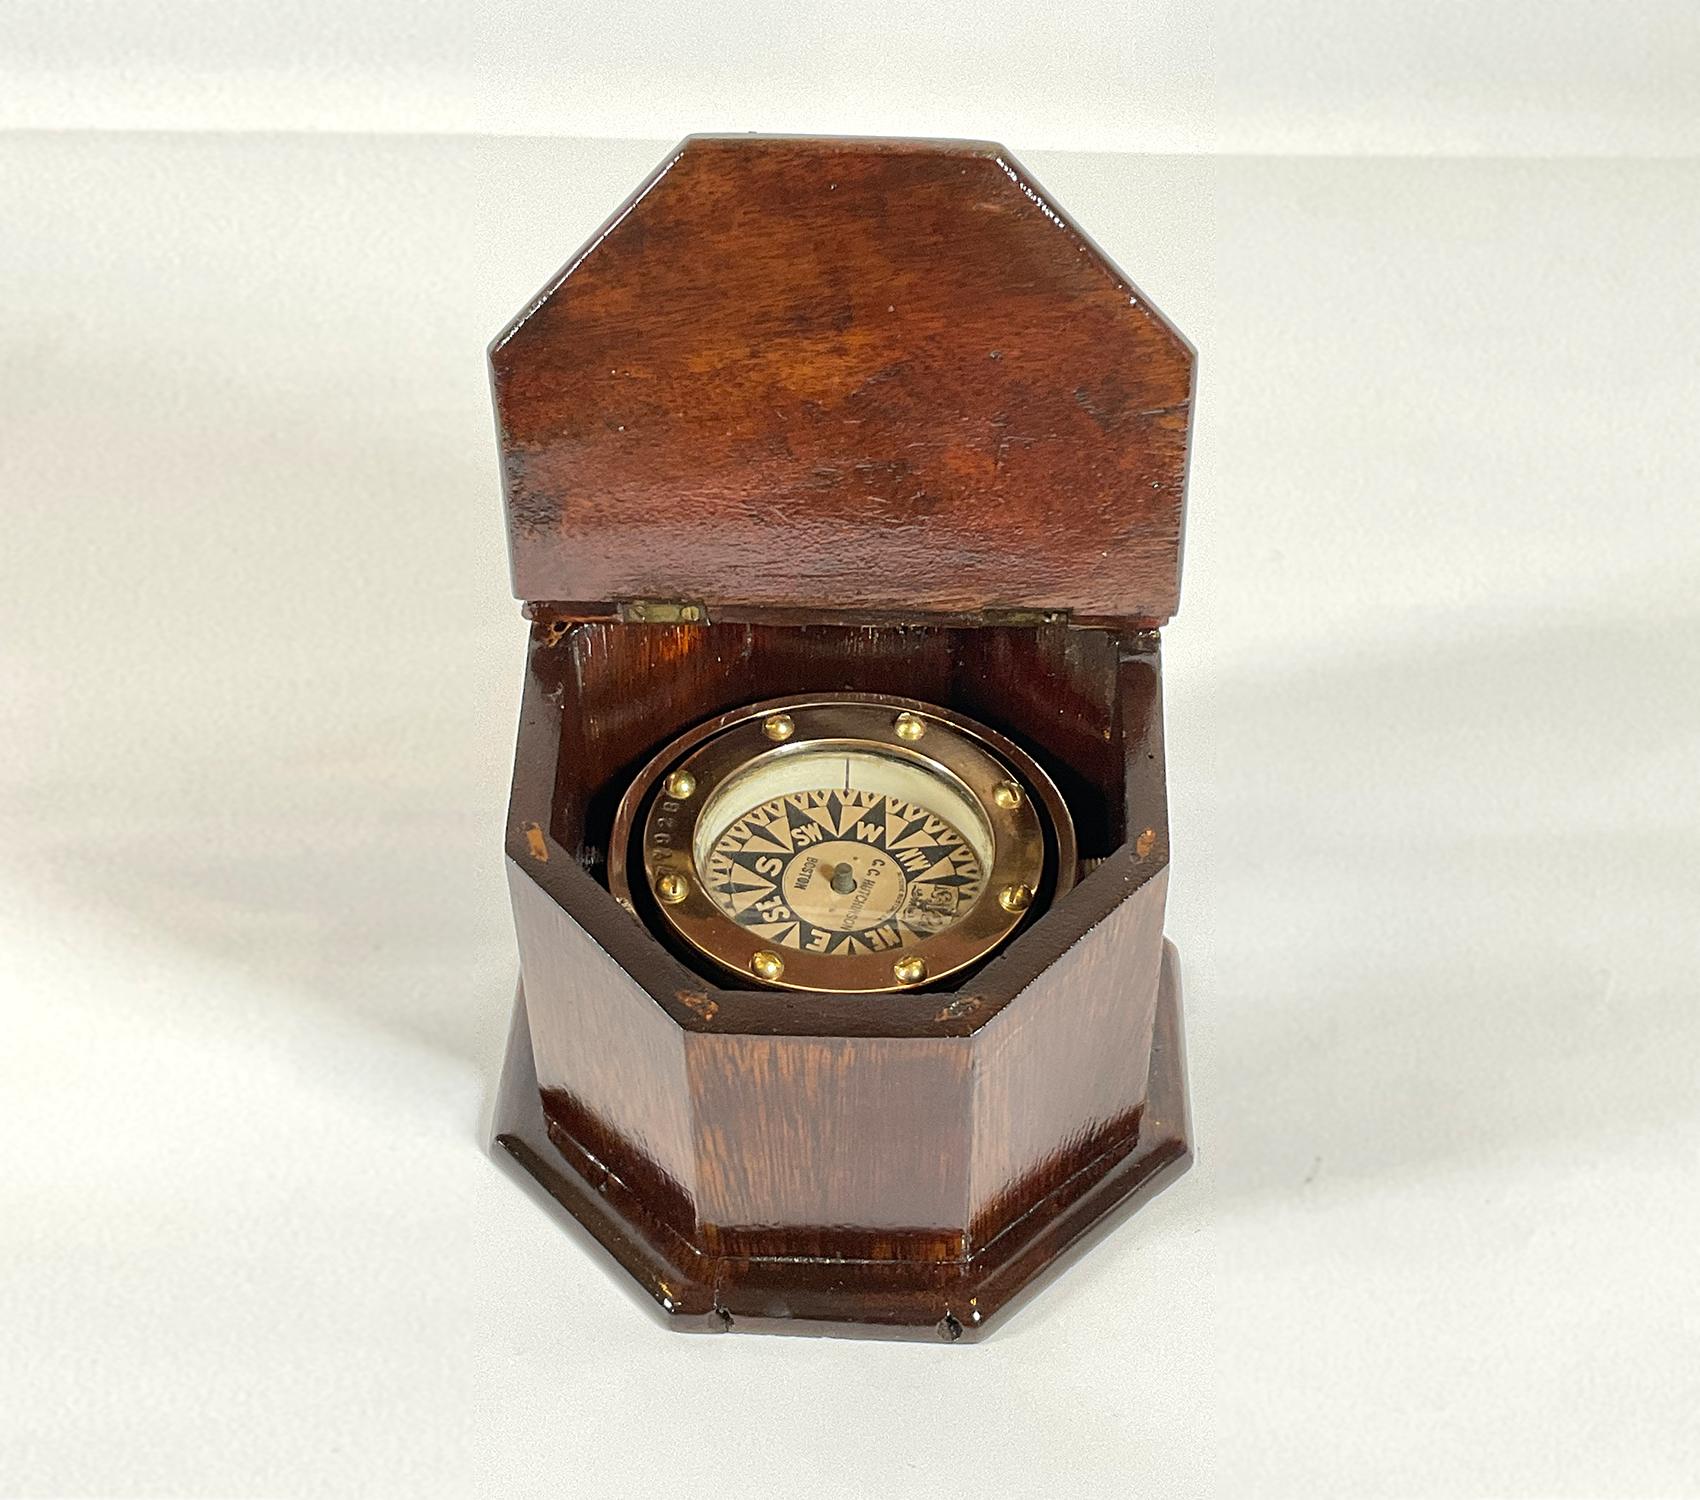 Highly polished 19th century boat compass by Ritchie, Boston USA. Compass card has ship chandler name of CC Hutchinson of Boston. The compass is fitted to an 8 sided varnished mahogany binnacle box with slanted lid and brass hinge. 

Weight: 3